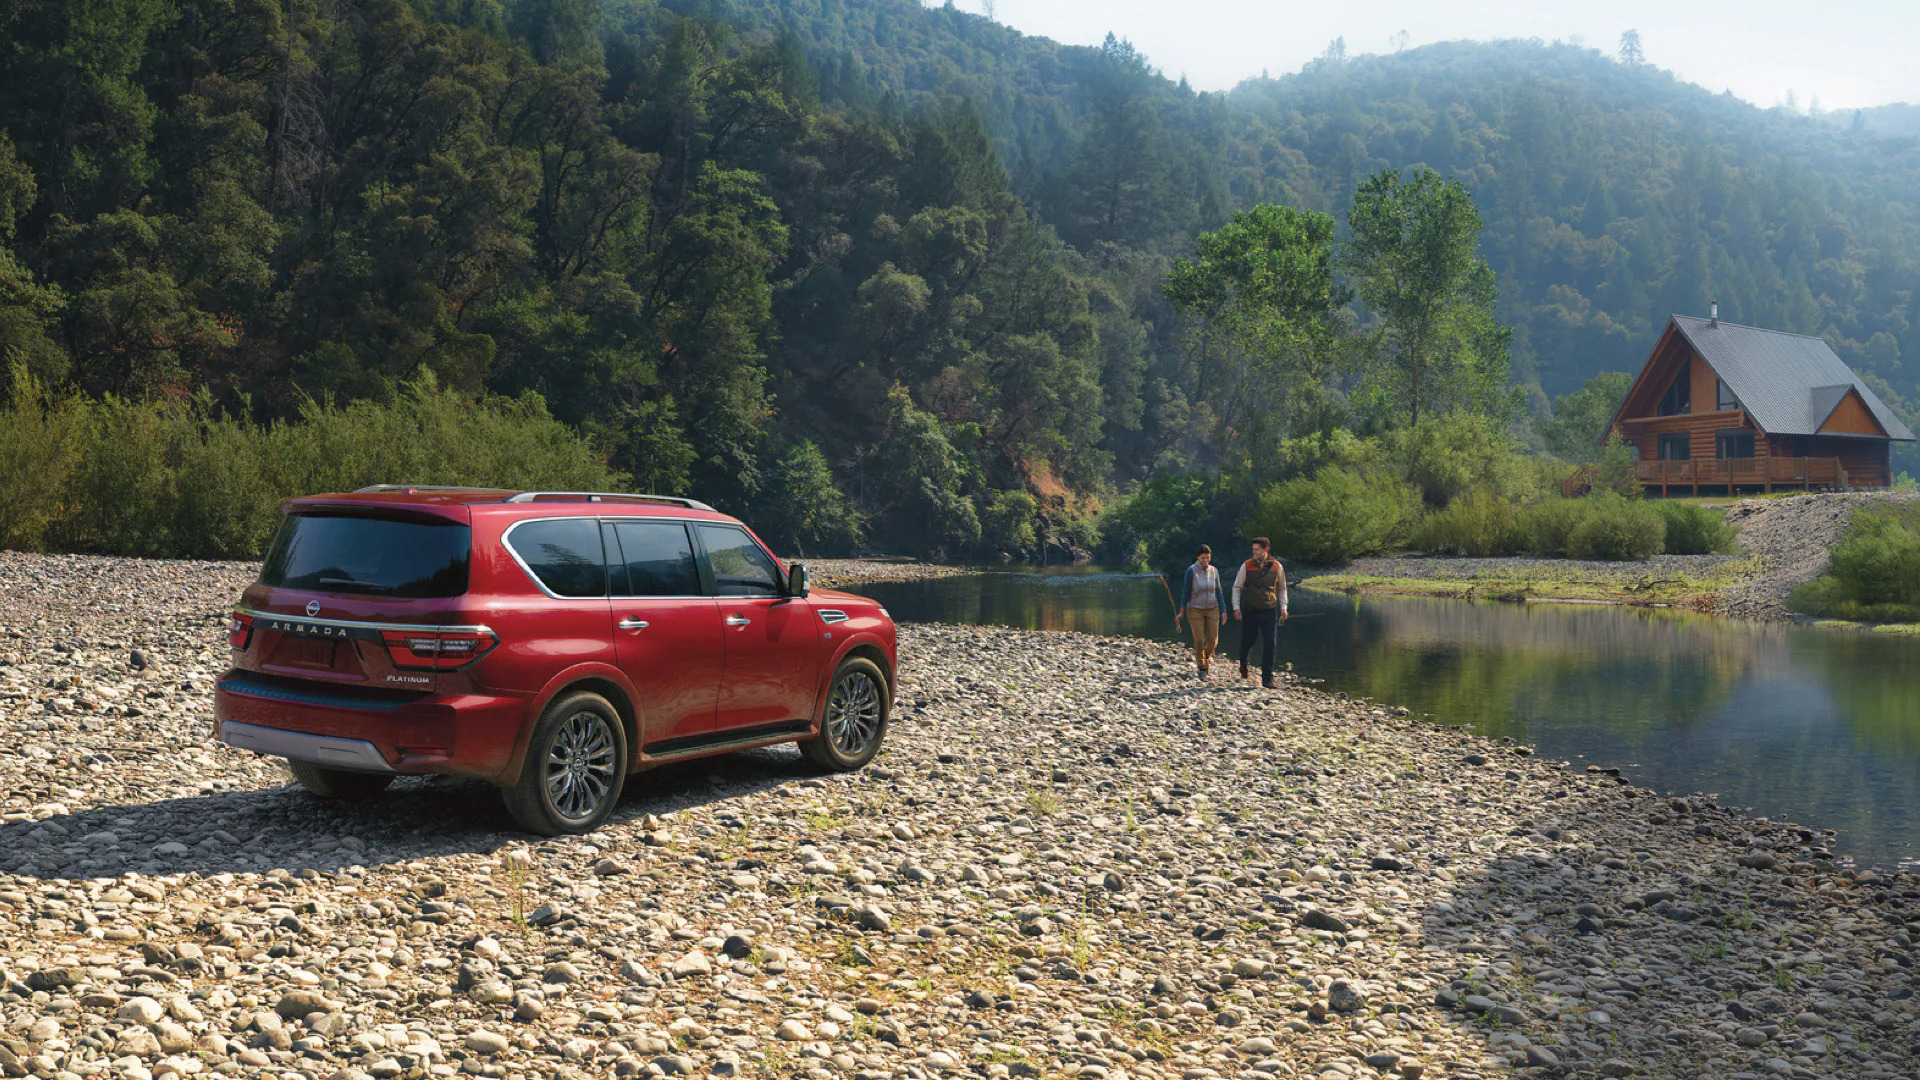 A red 2022 Nissan Armada parked near a river with a forest background. How much does a fully loaded one cost?